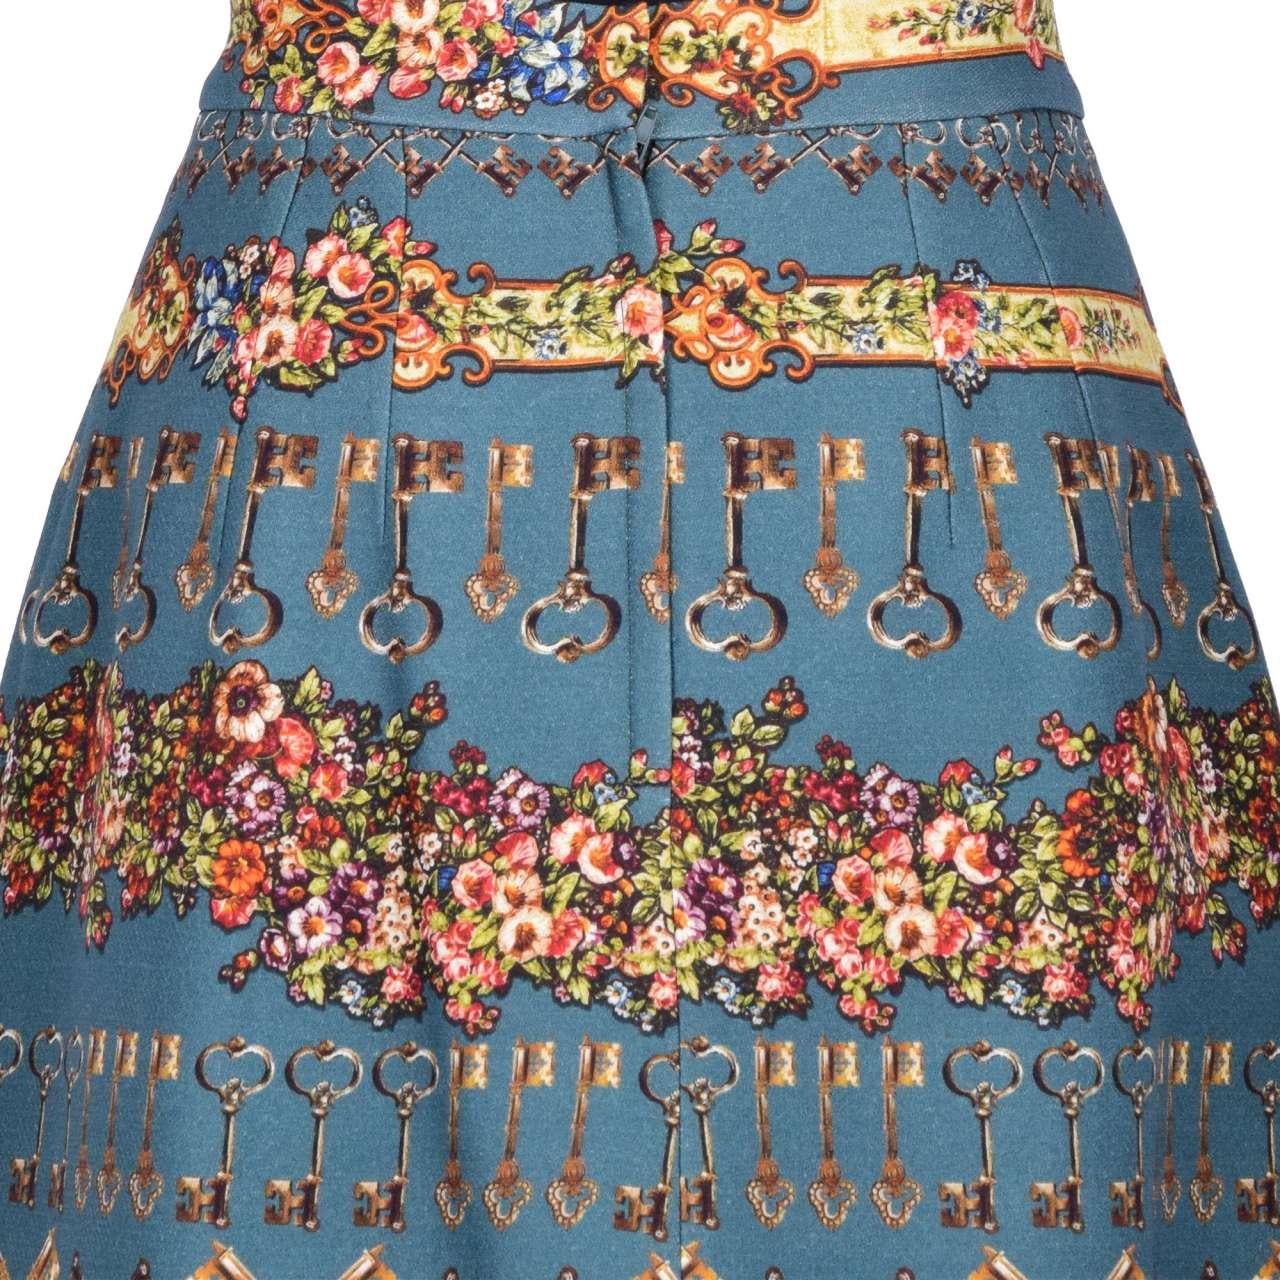 - Wool and Silk skirt with gold keys and flowers print by DOLCE & GABBANA Black Label - New with Tag - Material: 72% Wool, 28% Silk - Lining: 96% Silk, 4% Elastan - Gold and silver keys print - Zip and push button fastening - MADE IN ITALY - Model: